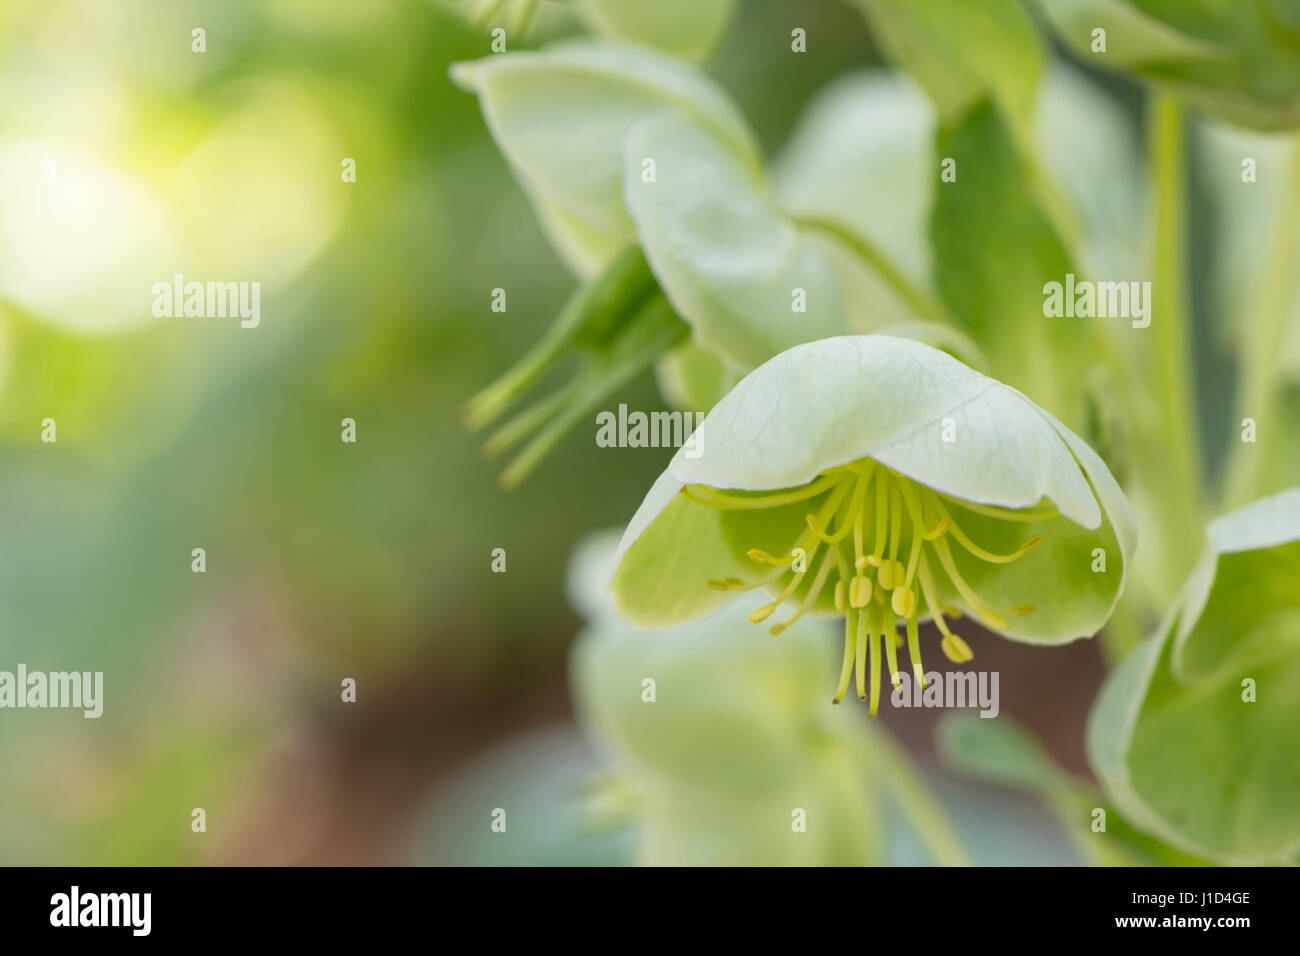 A group of Hellebore (Helleborus Argutifolius - Ranunculaceae) flowers, close up, taken outdoors. The flowers are positioned on the top right. Stock Photo